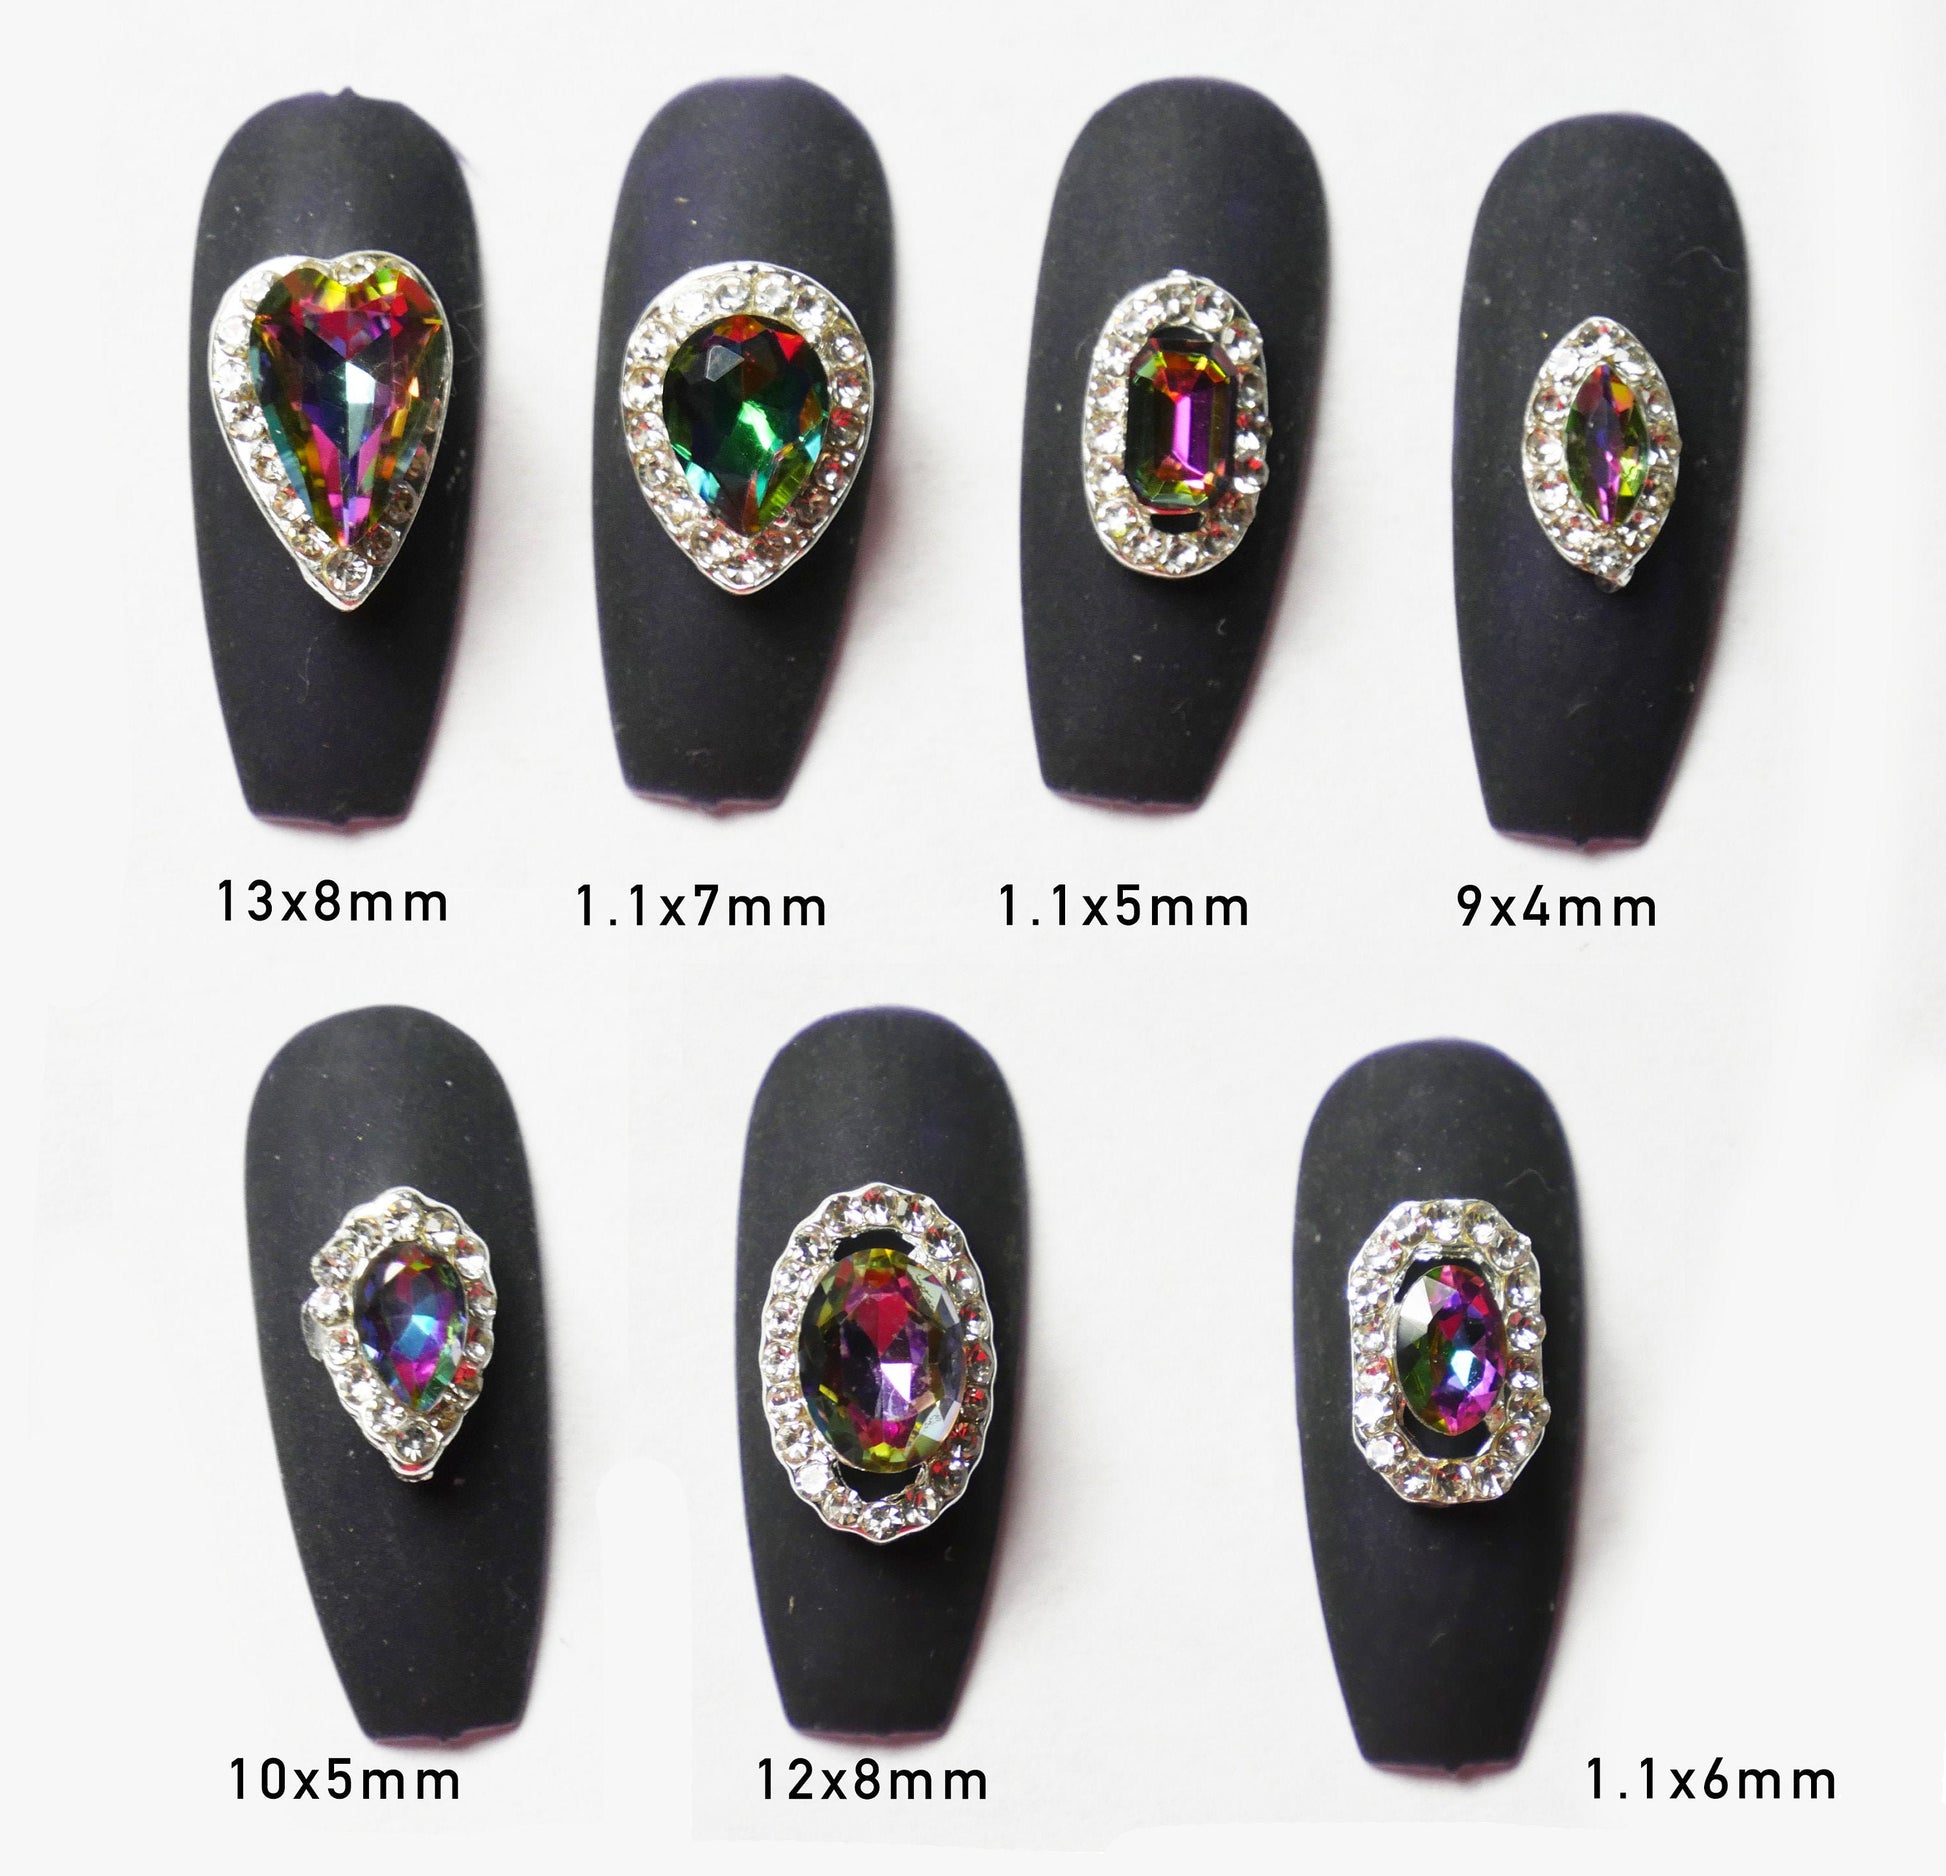 On sale 10pcs 3D silver zircon nail decoration/ Mixed Exclusive luxury design vintage charm jewelry supply